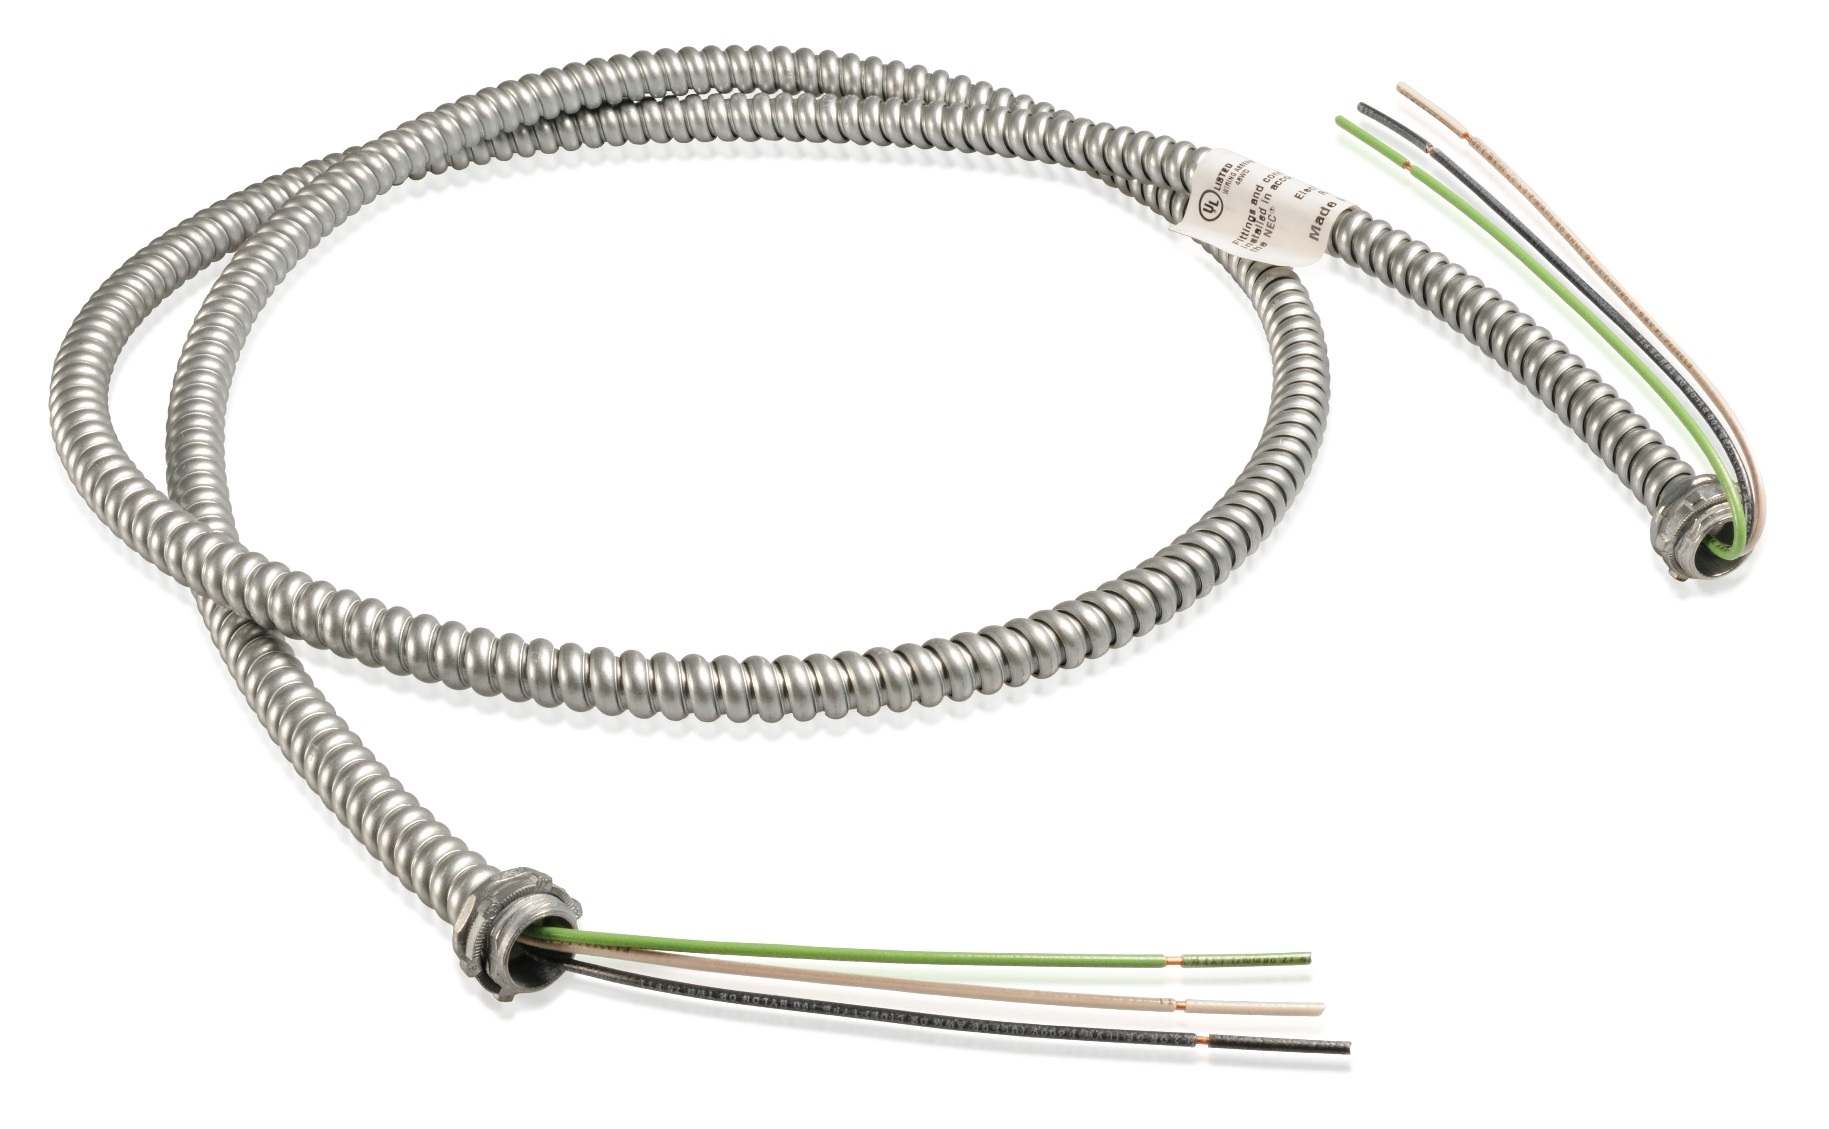 14 INCH HEAVY DUTY STAINLESS STEEL WIRE WHIP - Rush's Kitchen